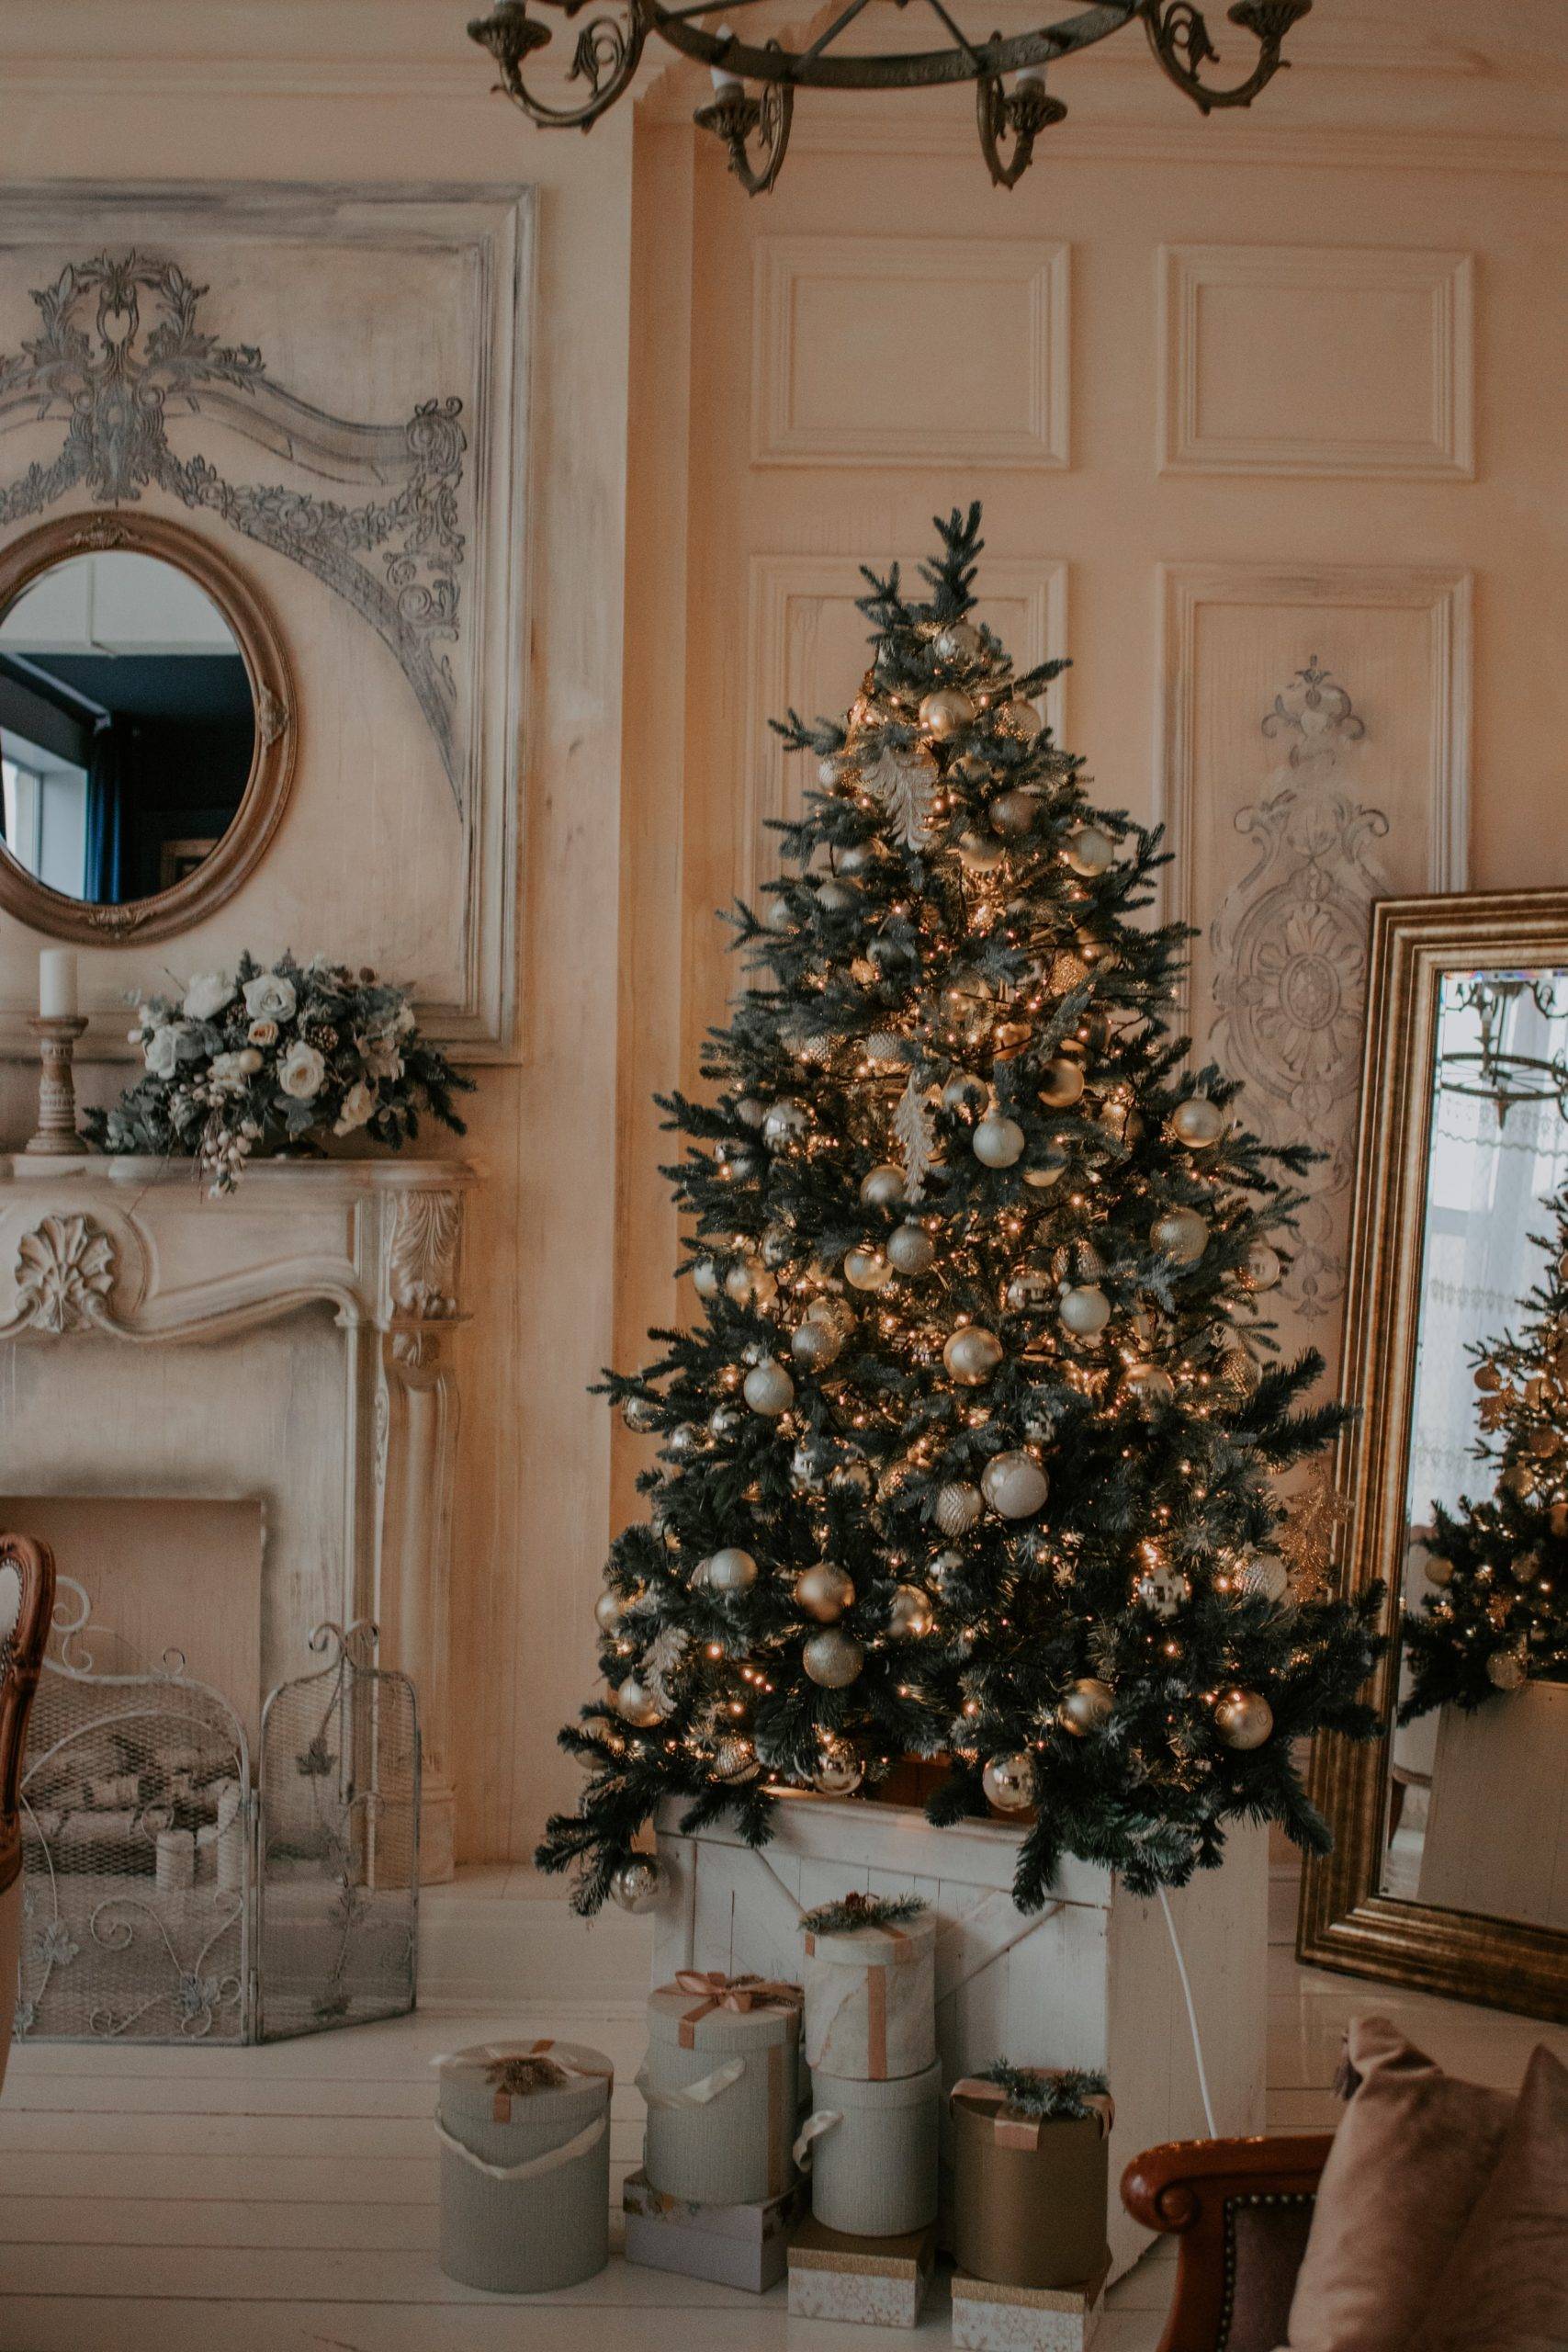 Extravagant Christmas tree with golden ornaments (from Unsplash)